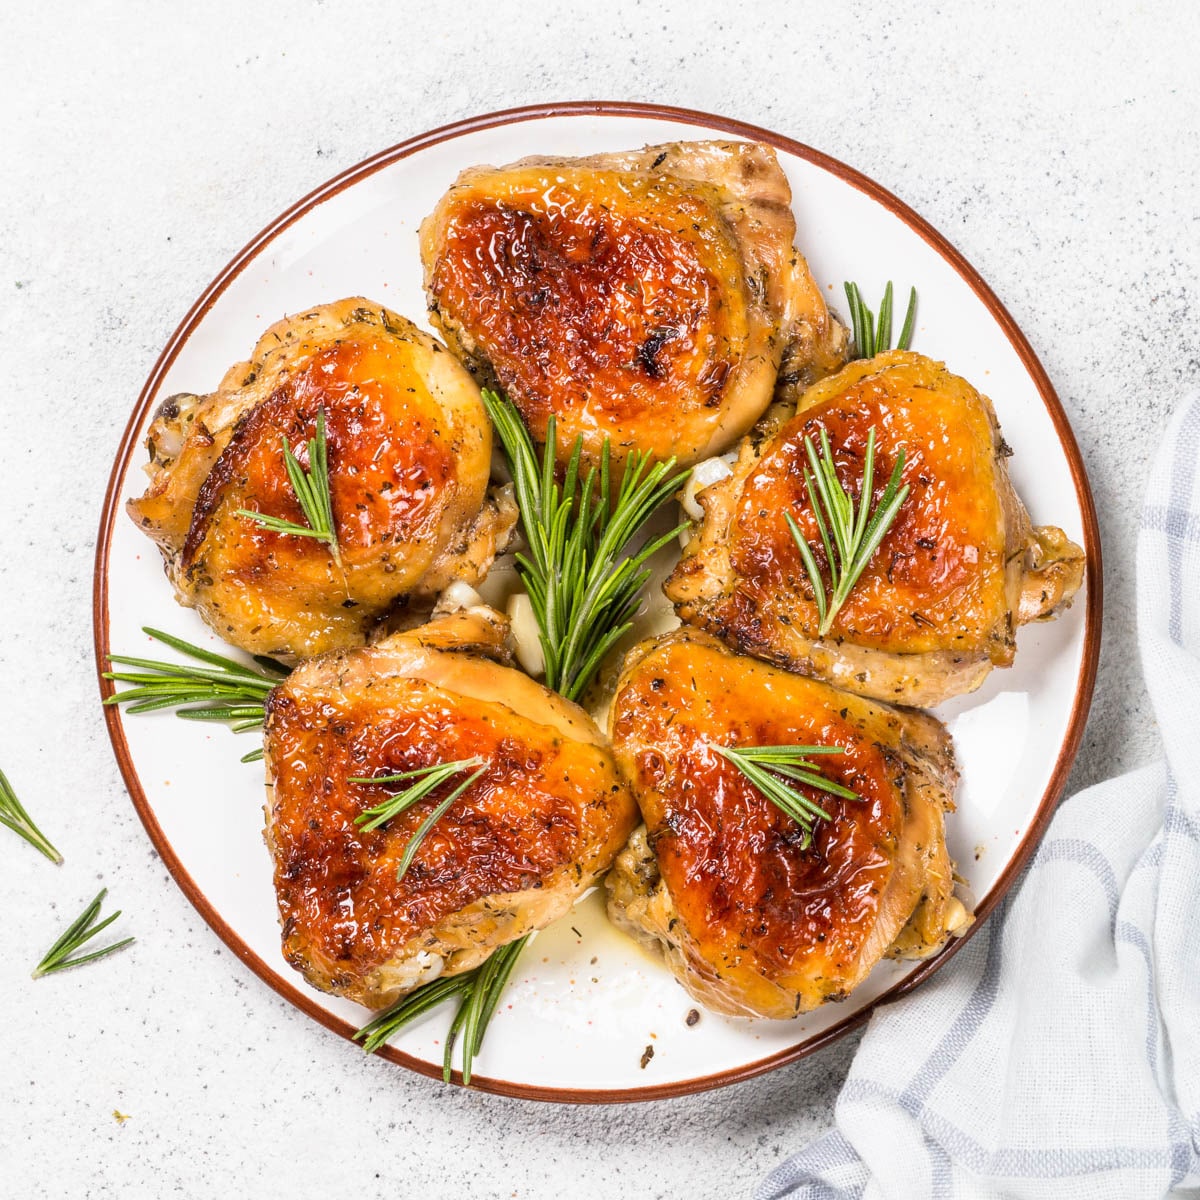 Five grilled chicken thighs on a round plate with sprigs of rosemary